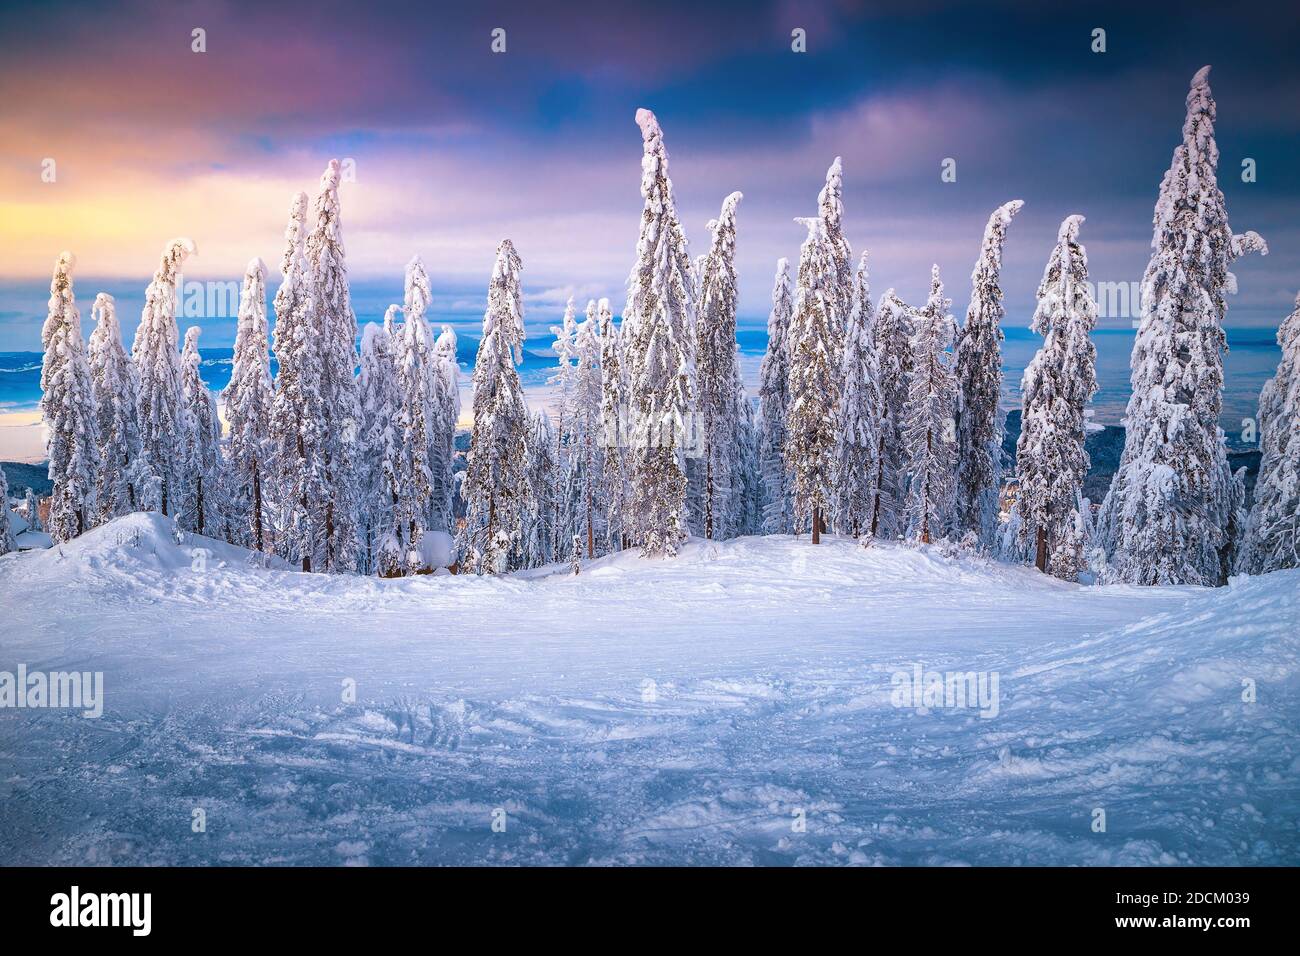 Amazing frozen winter forest landscape with snow covered pine trees at sunset, Romania. Happy New Year celebration concept Stock Photo